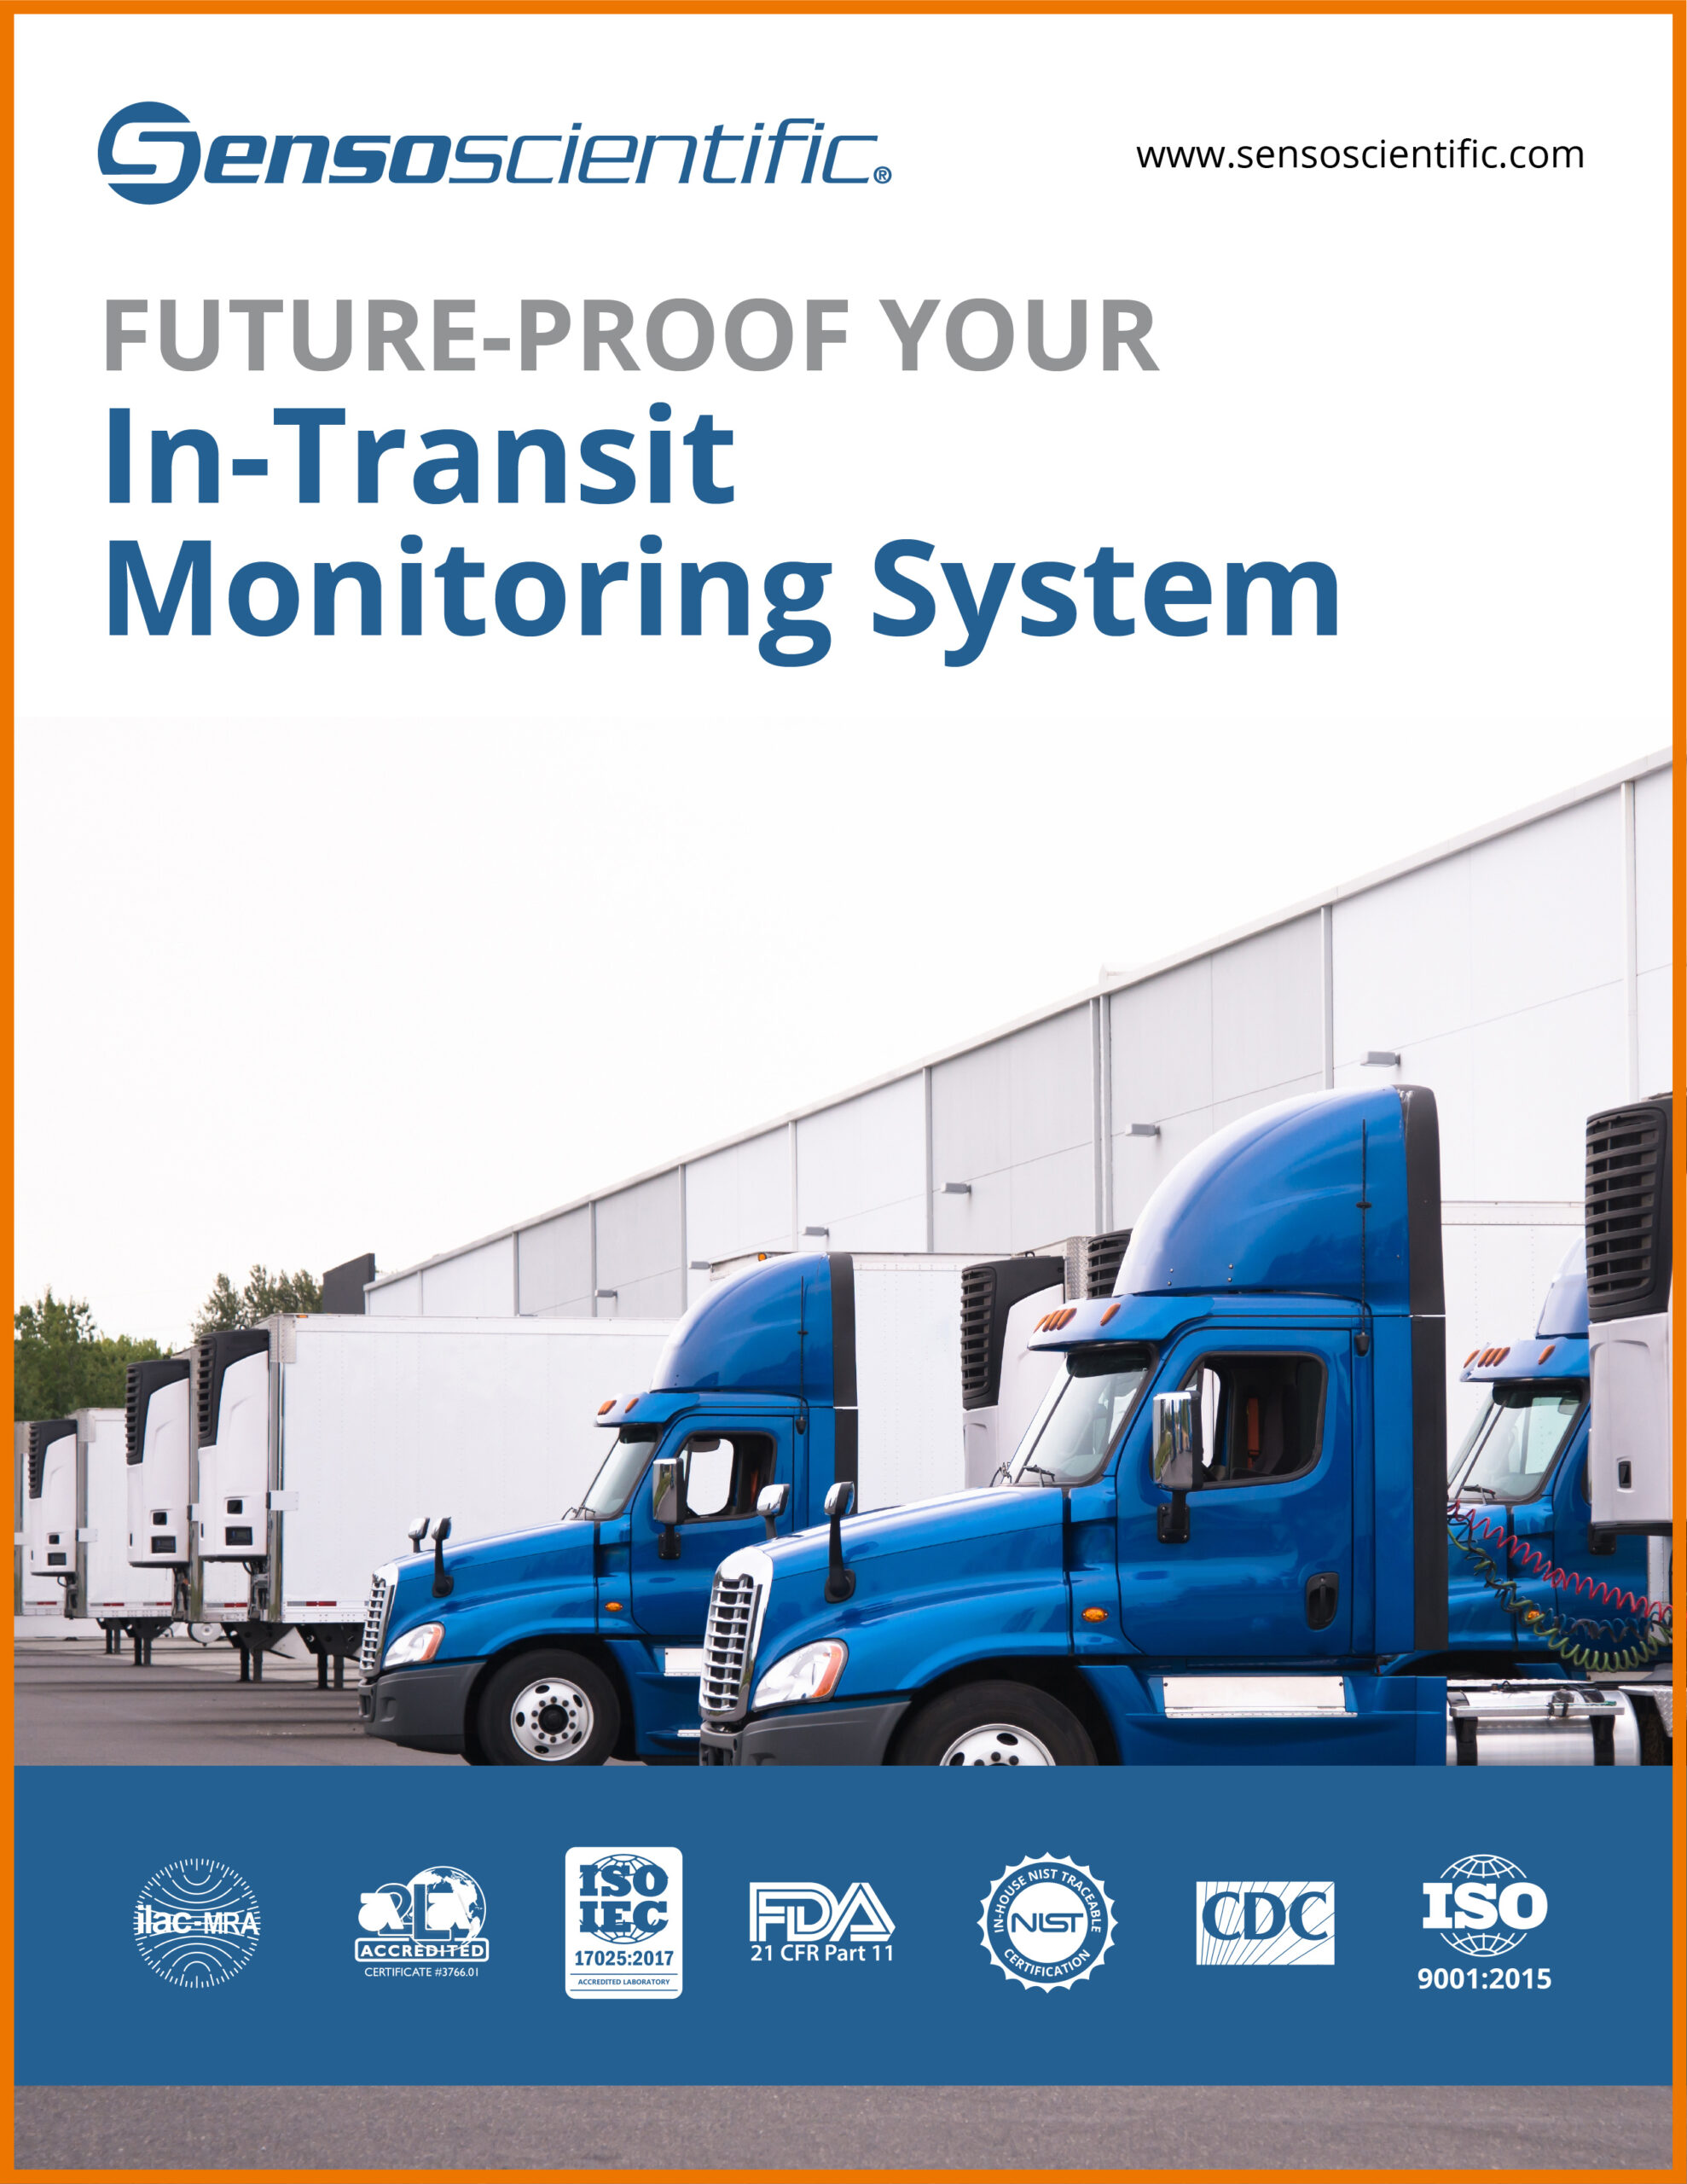 Vehicle temperature monitoring system brochure